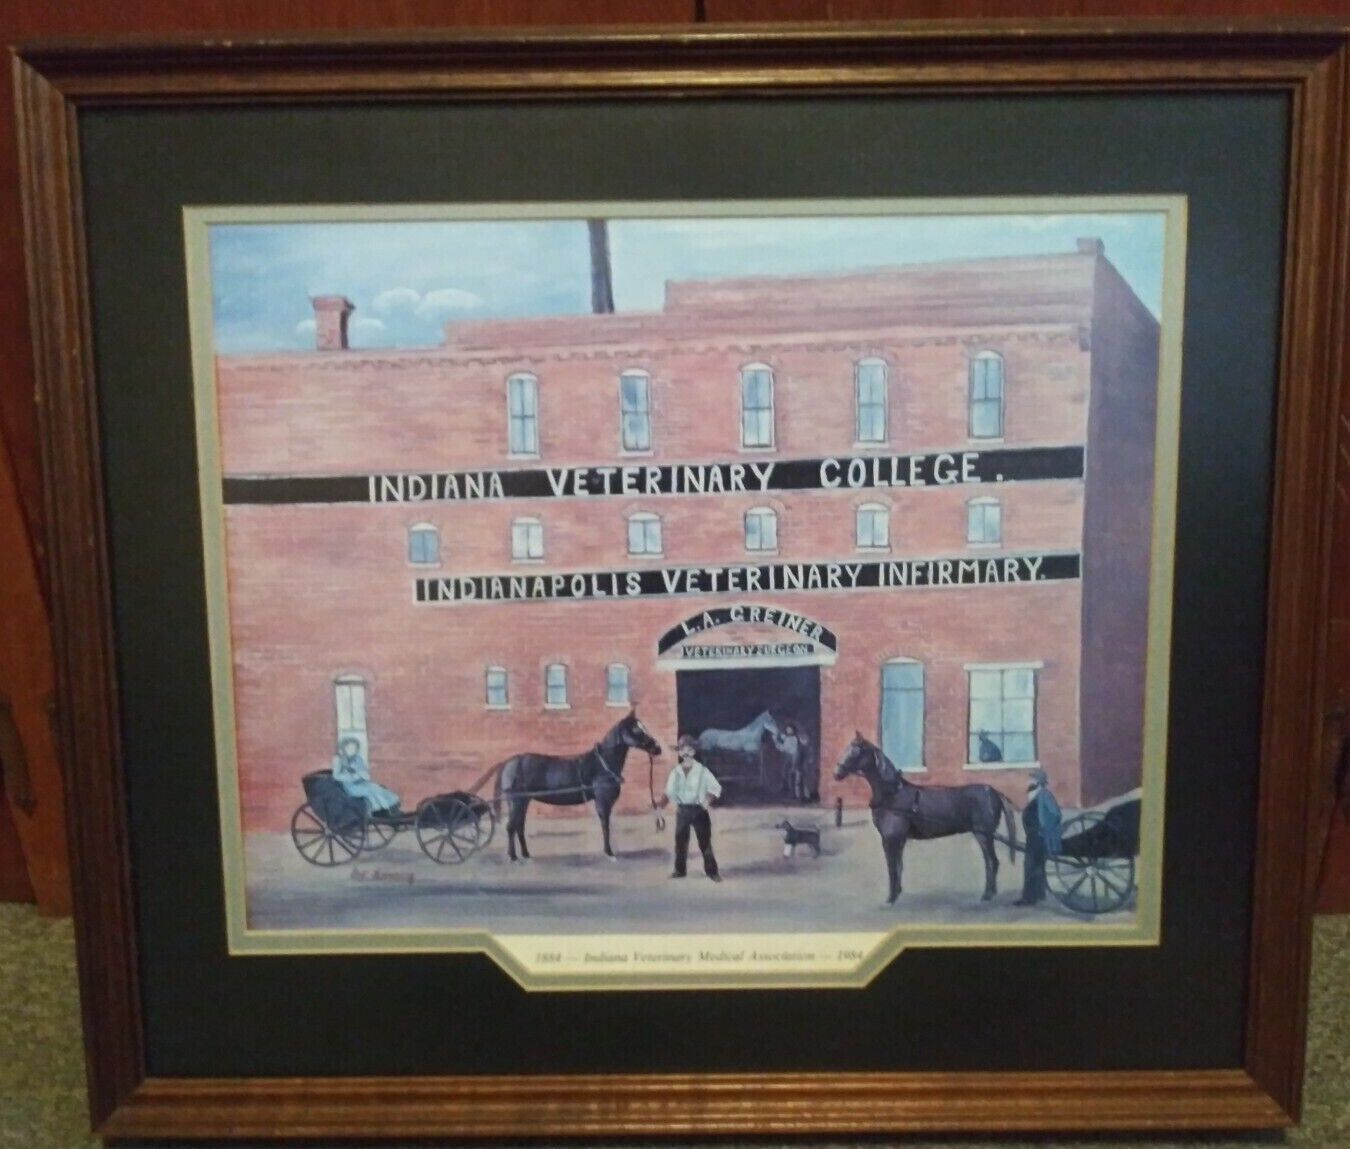 Indiana Veterinary Association College 100th Anniversary Print 1988 Framed Matte